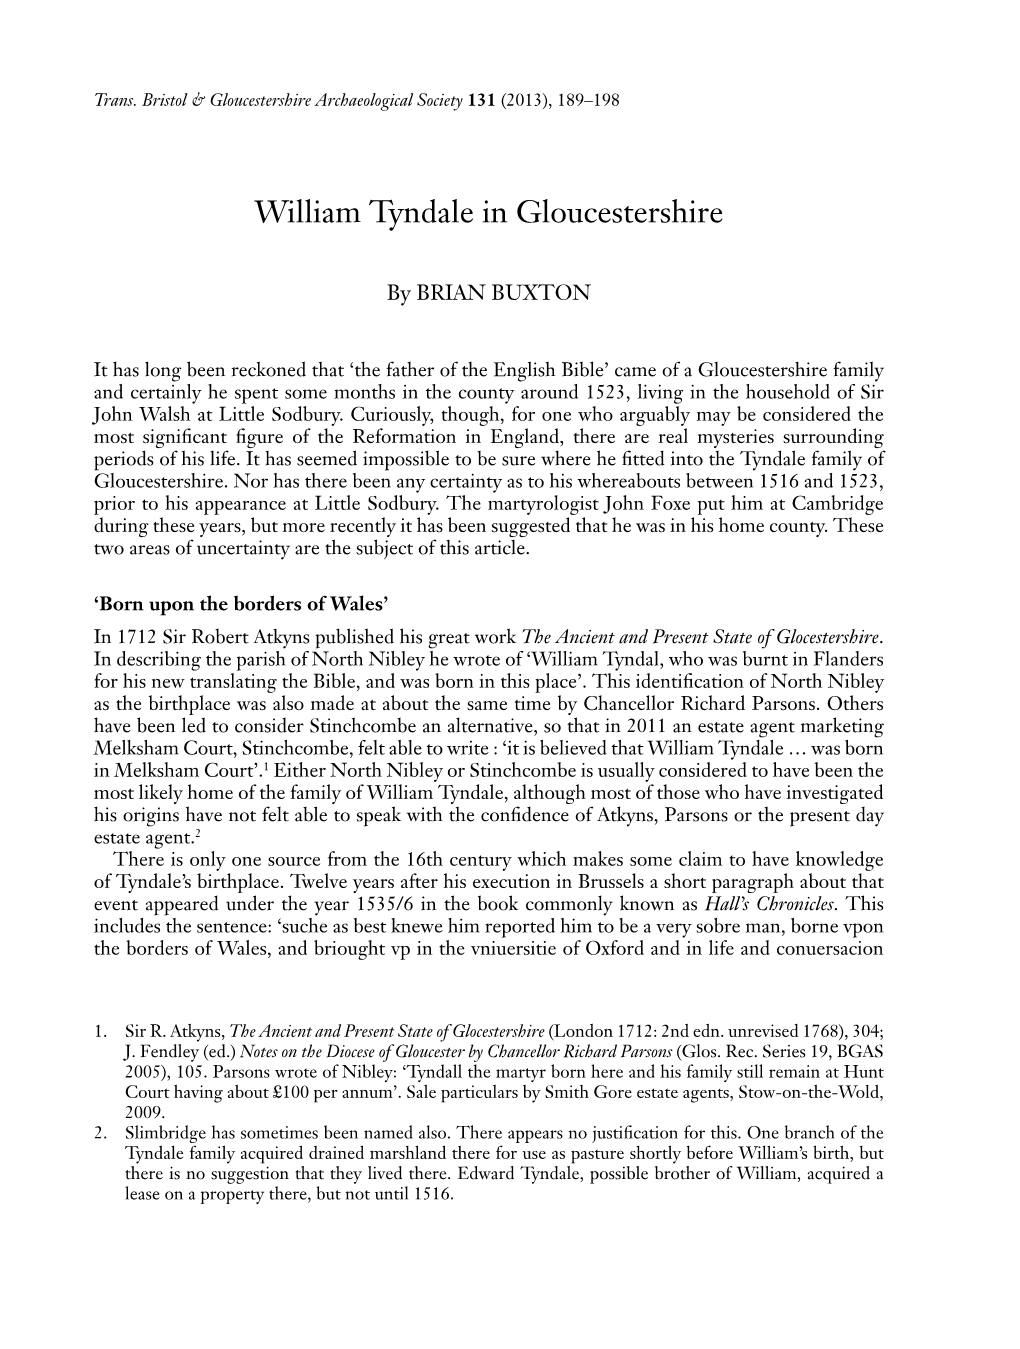 William Tyndale in Gloucestershire